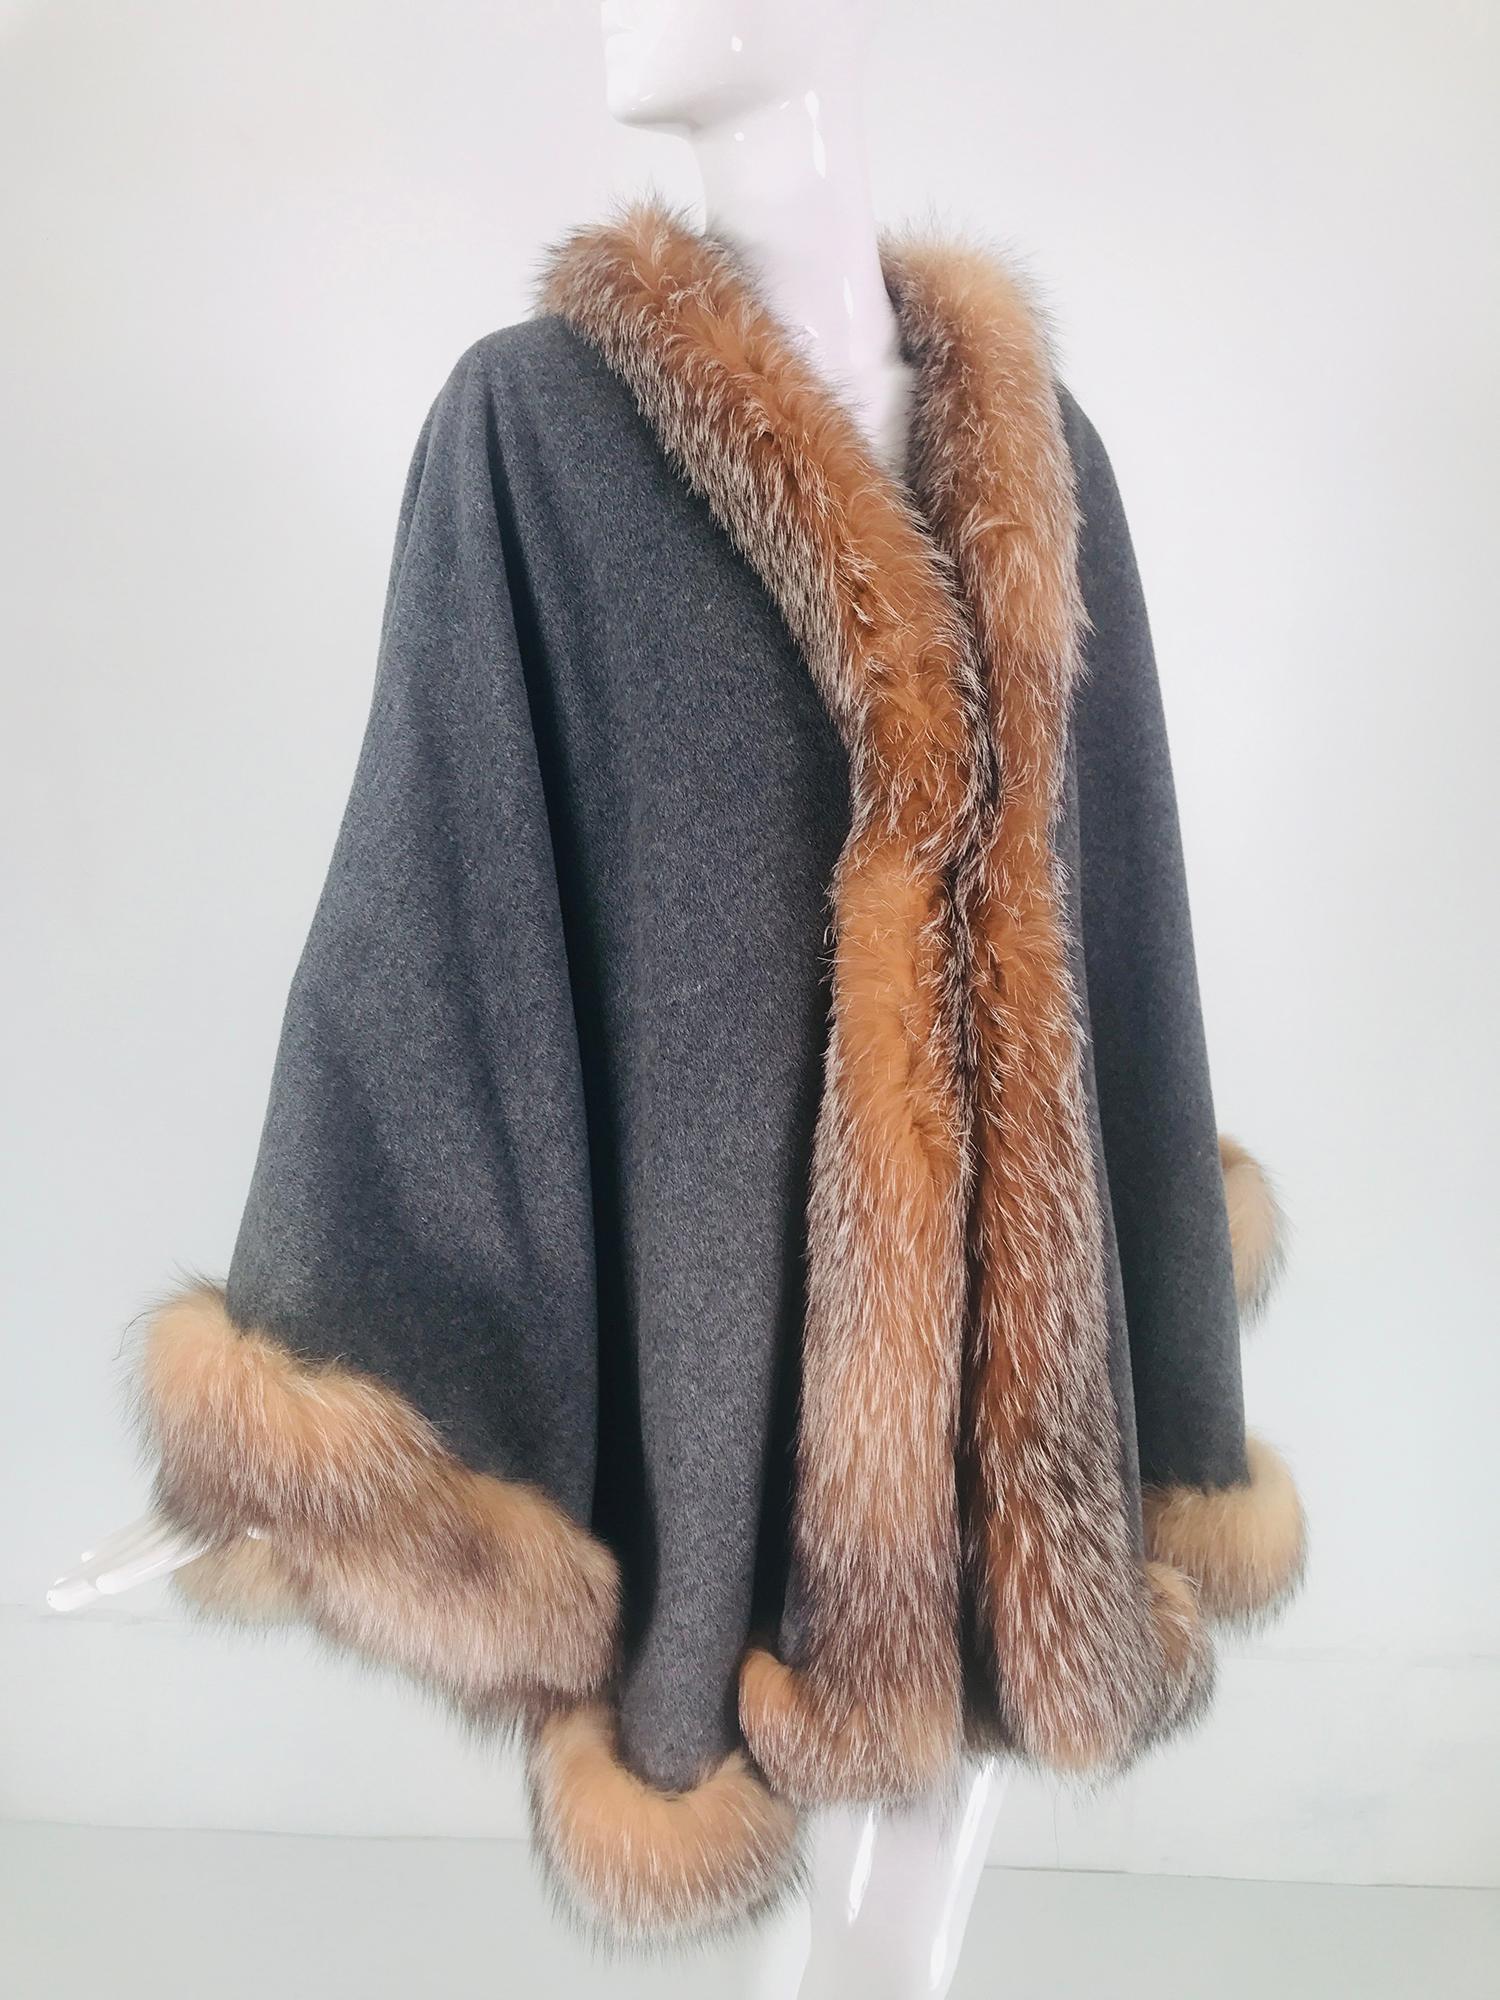 Sprung Freres Paris Red Fox Wool/Cashmere Reversible Cape Grey/Camel Tan OS 6